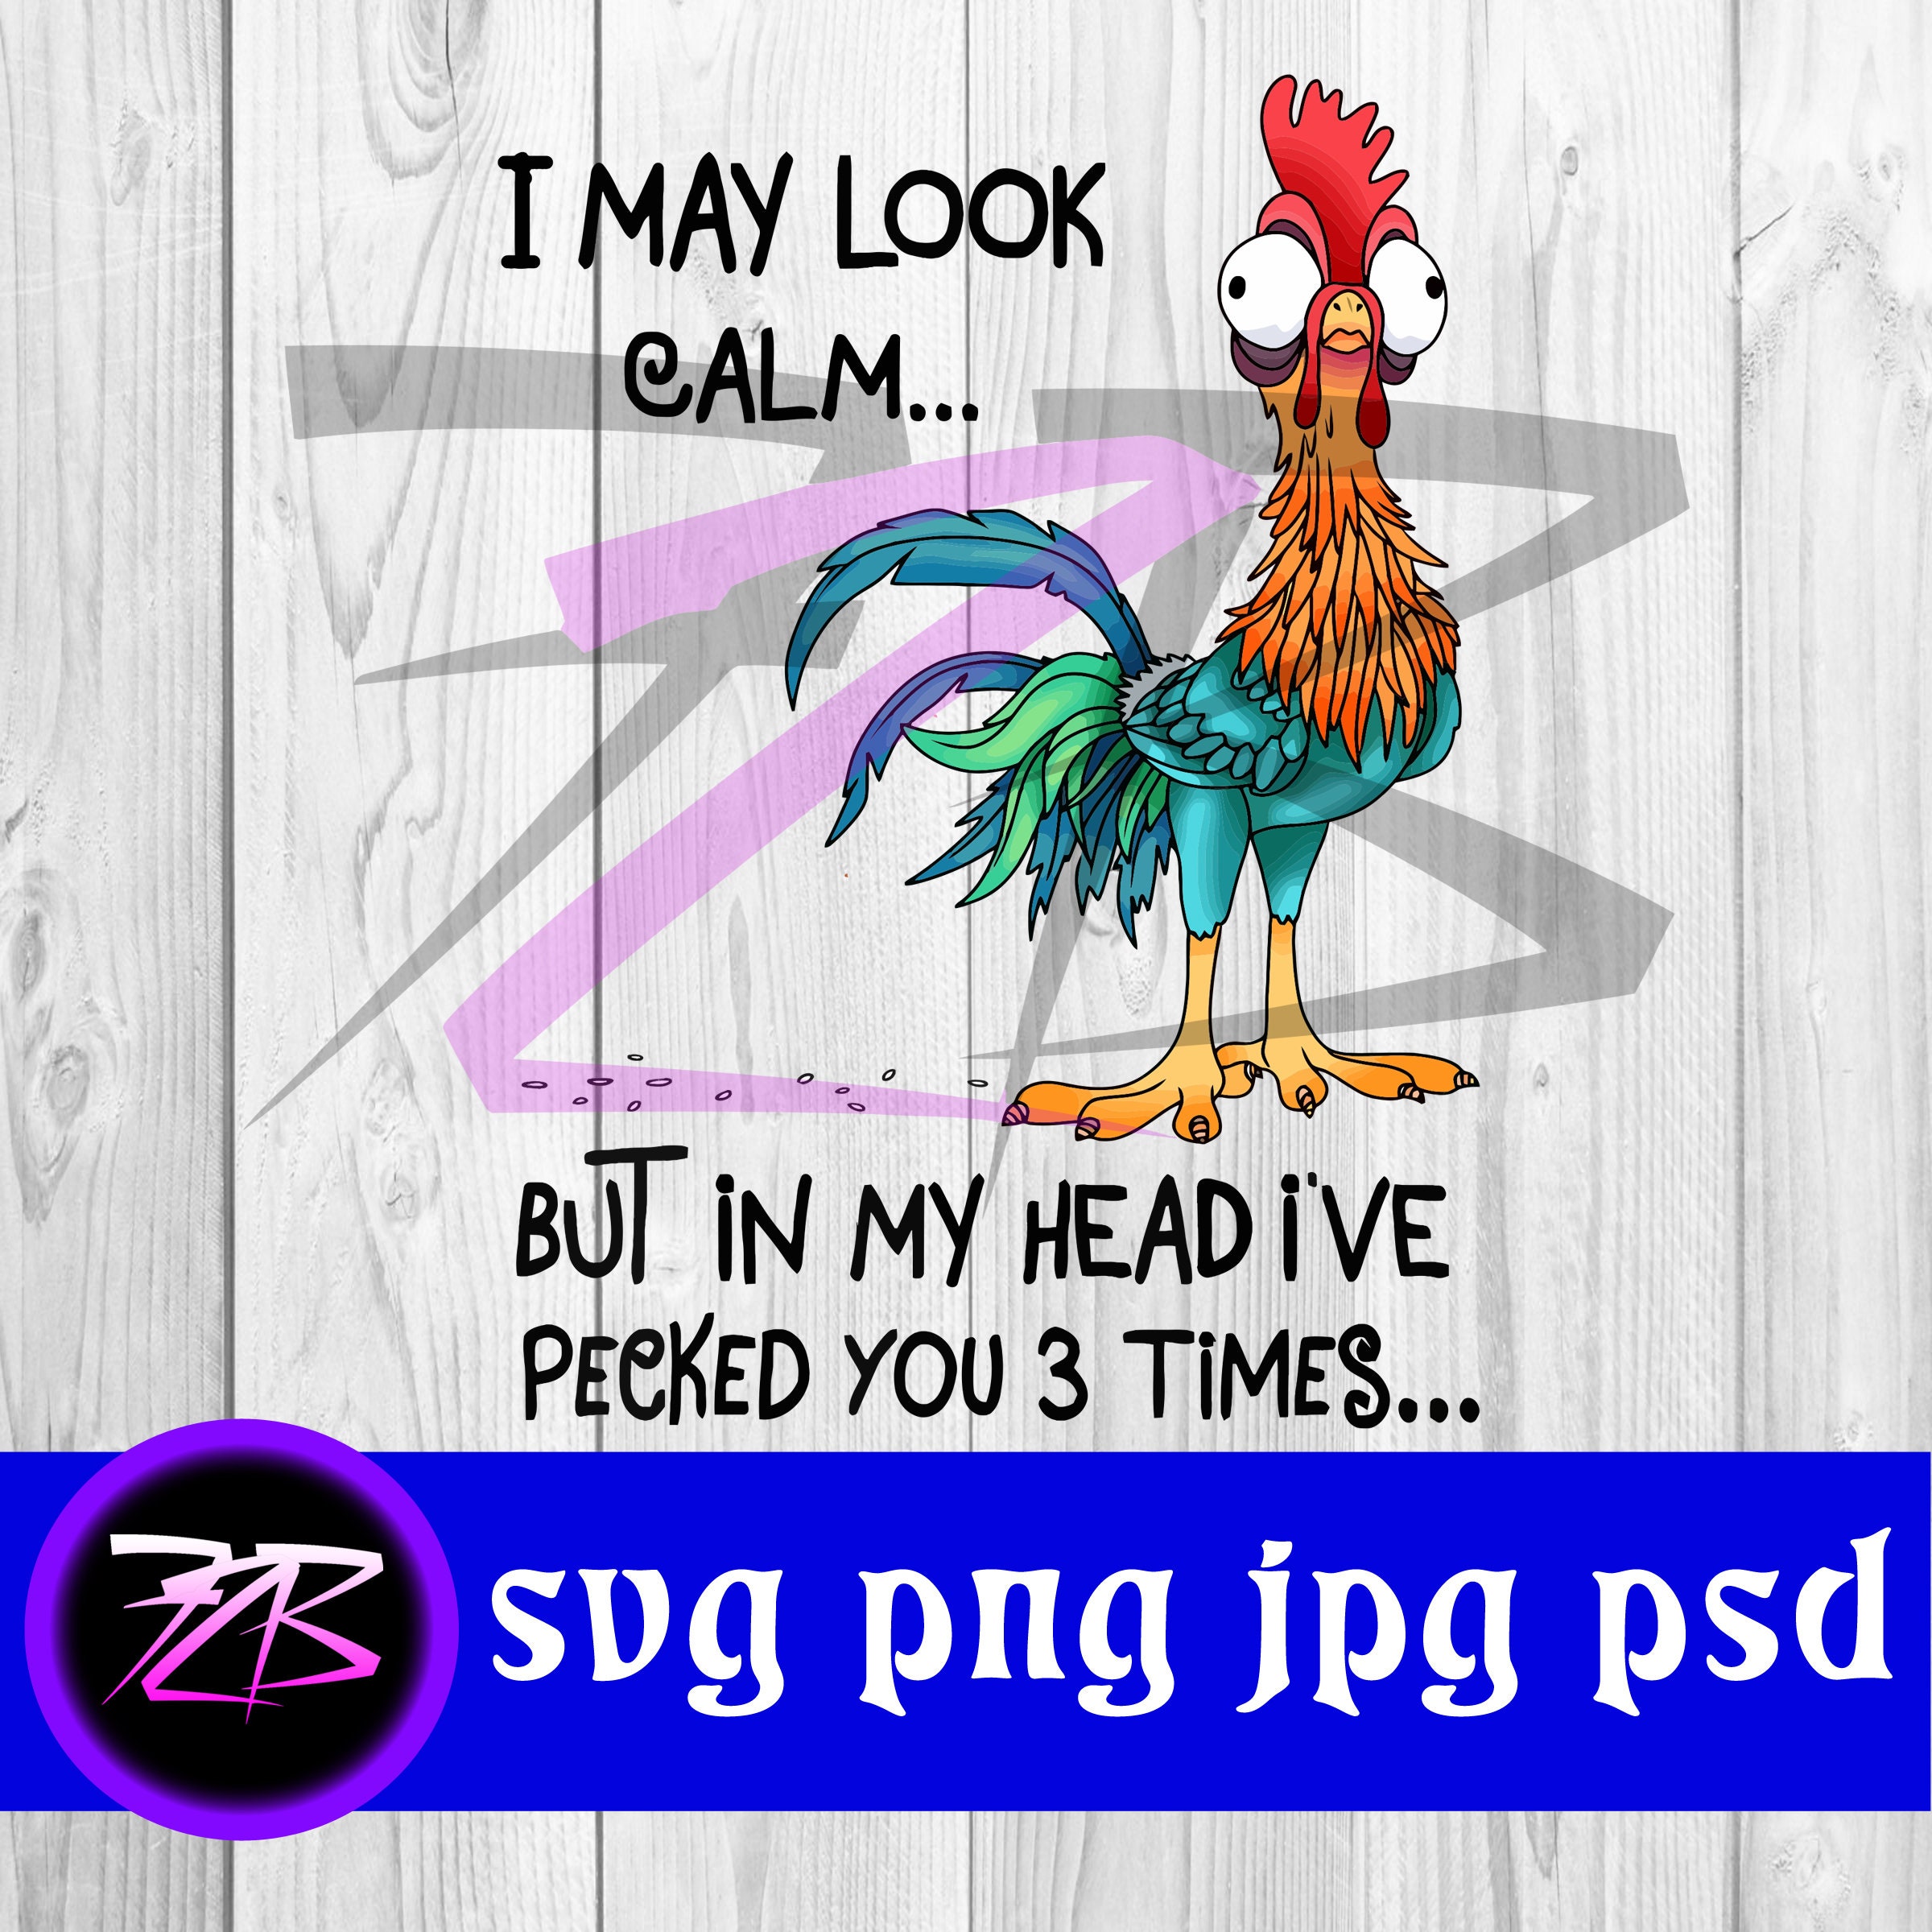 I May Look Calm but in My Head I've Pecked You 3 Times Svg-jpg-png-psd ...